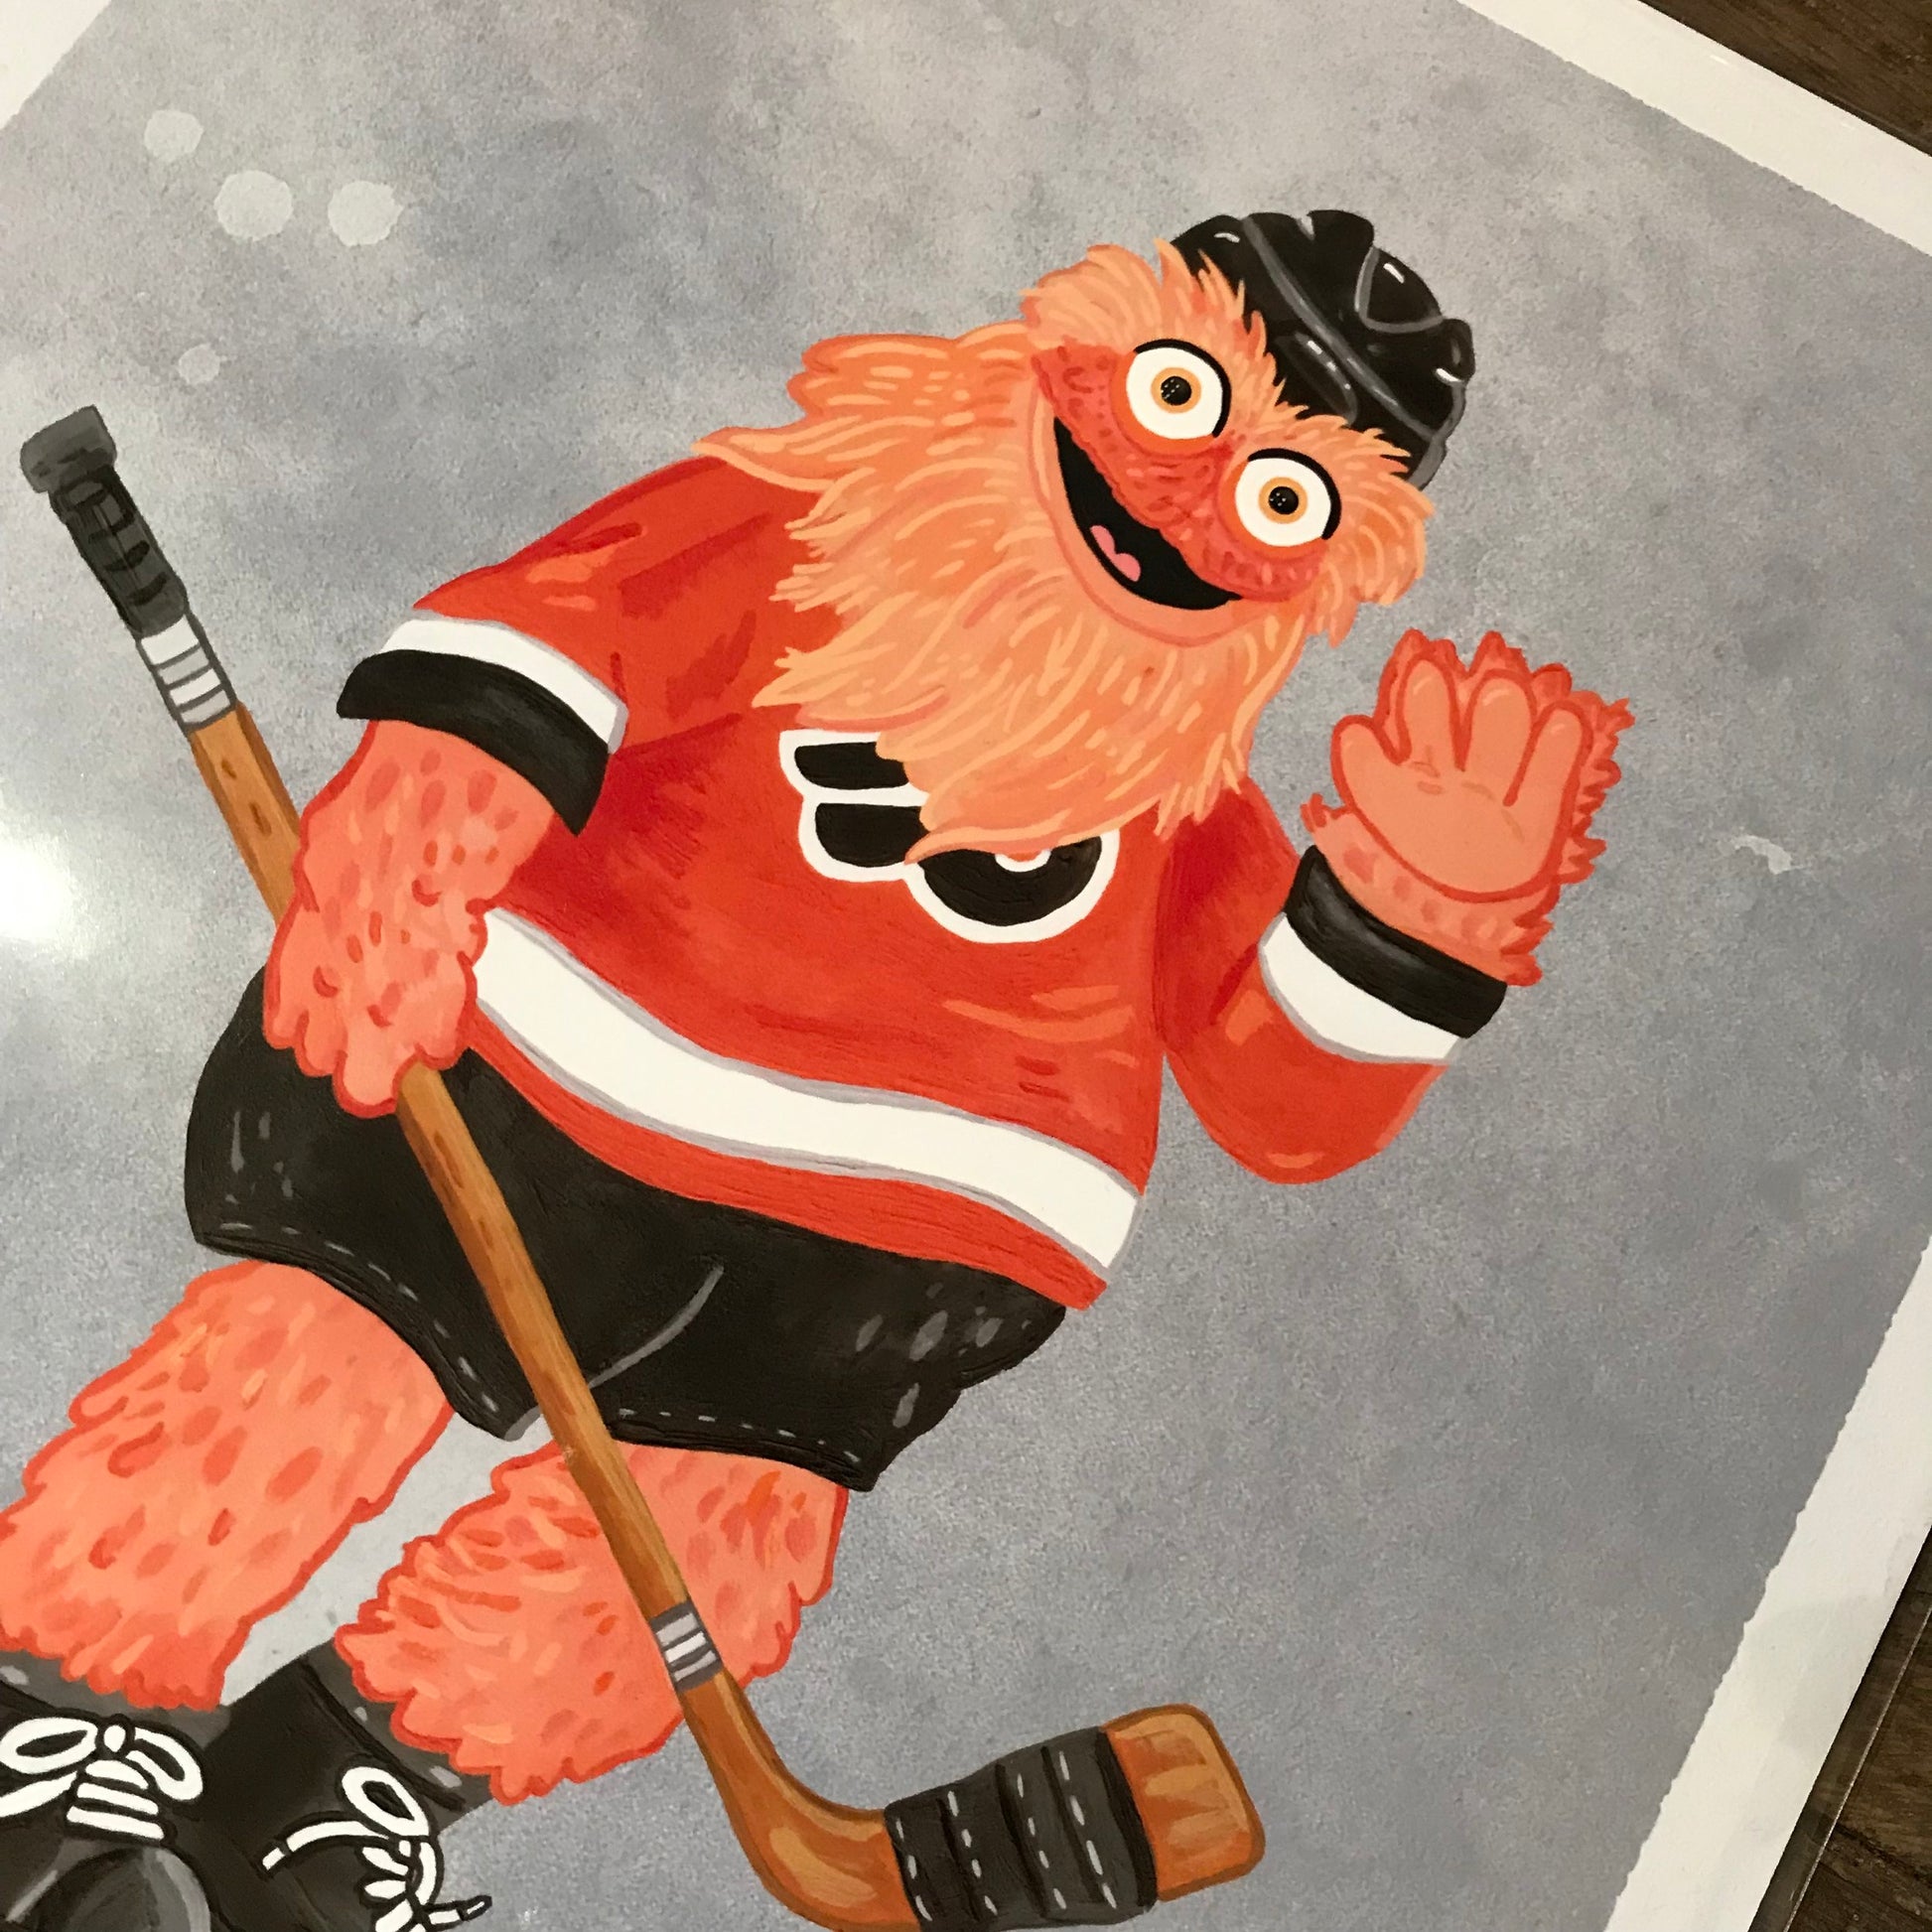 Illustration of cartoon character Philly Mascot Prints dressed as a hockey player, smiling and waving.